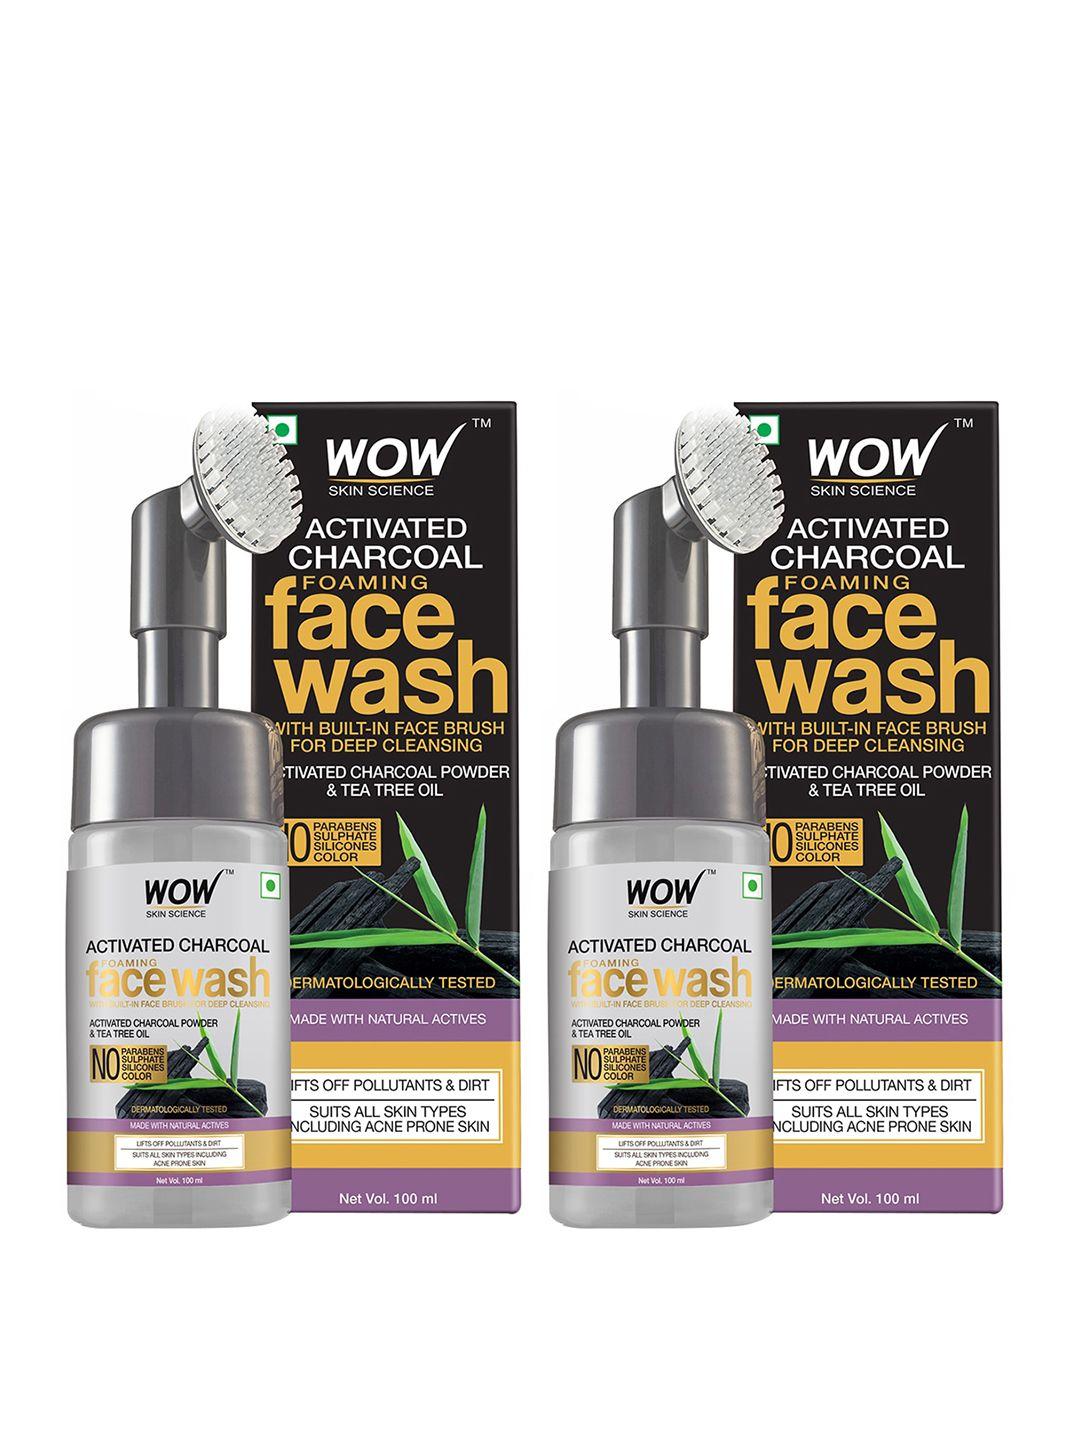 wow skin science set of 2 activated charcoal foaming face wash with built-in face brush